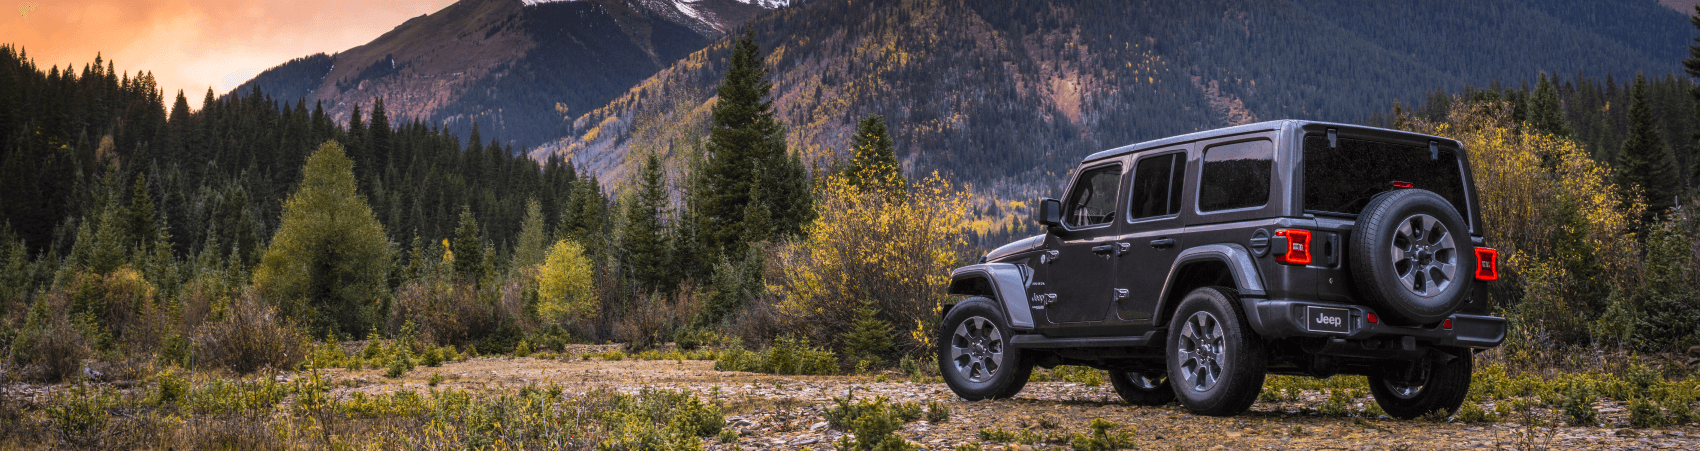 2021 Jeep Wrangler Features